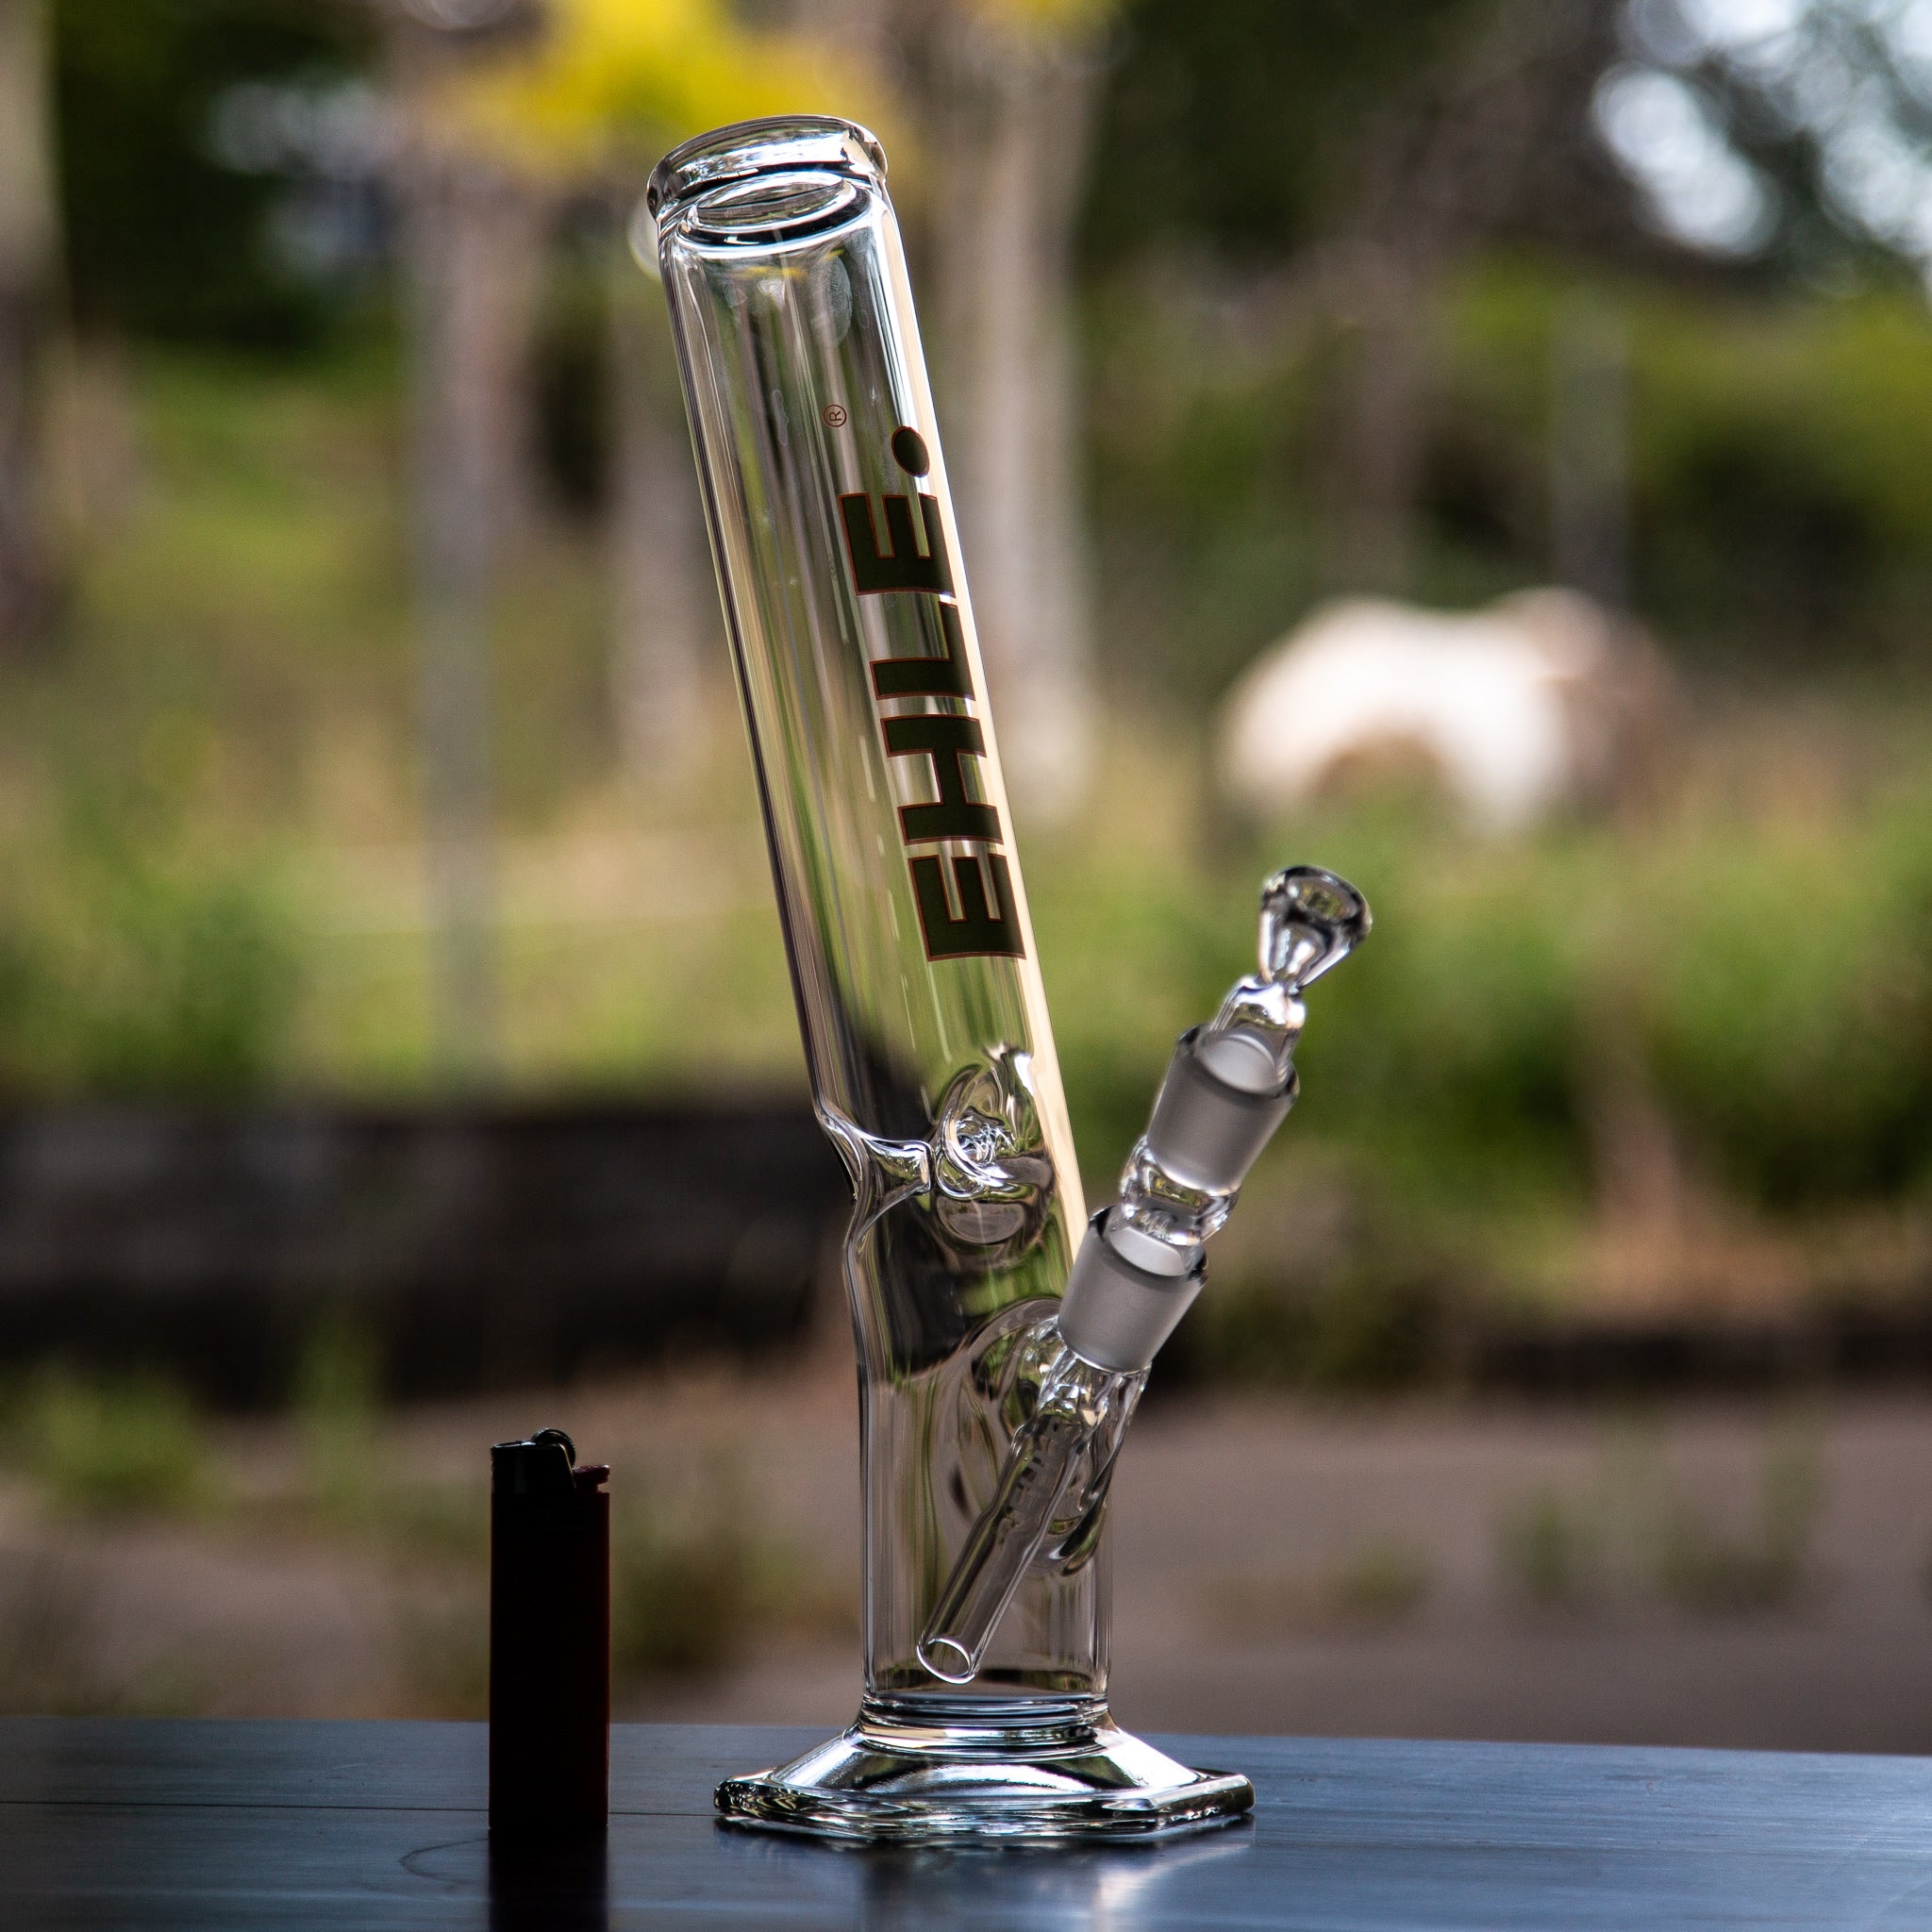 EHLE glass 500ml glass bongs and smoking pipes.